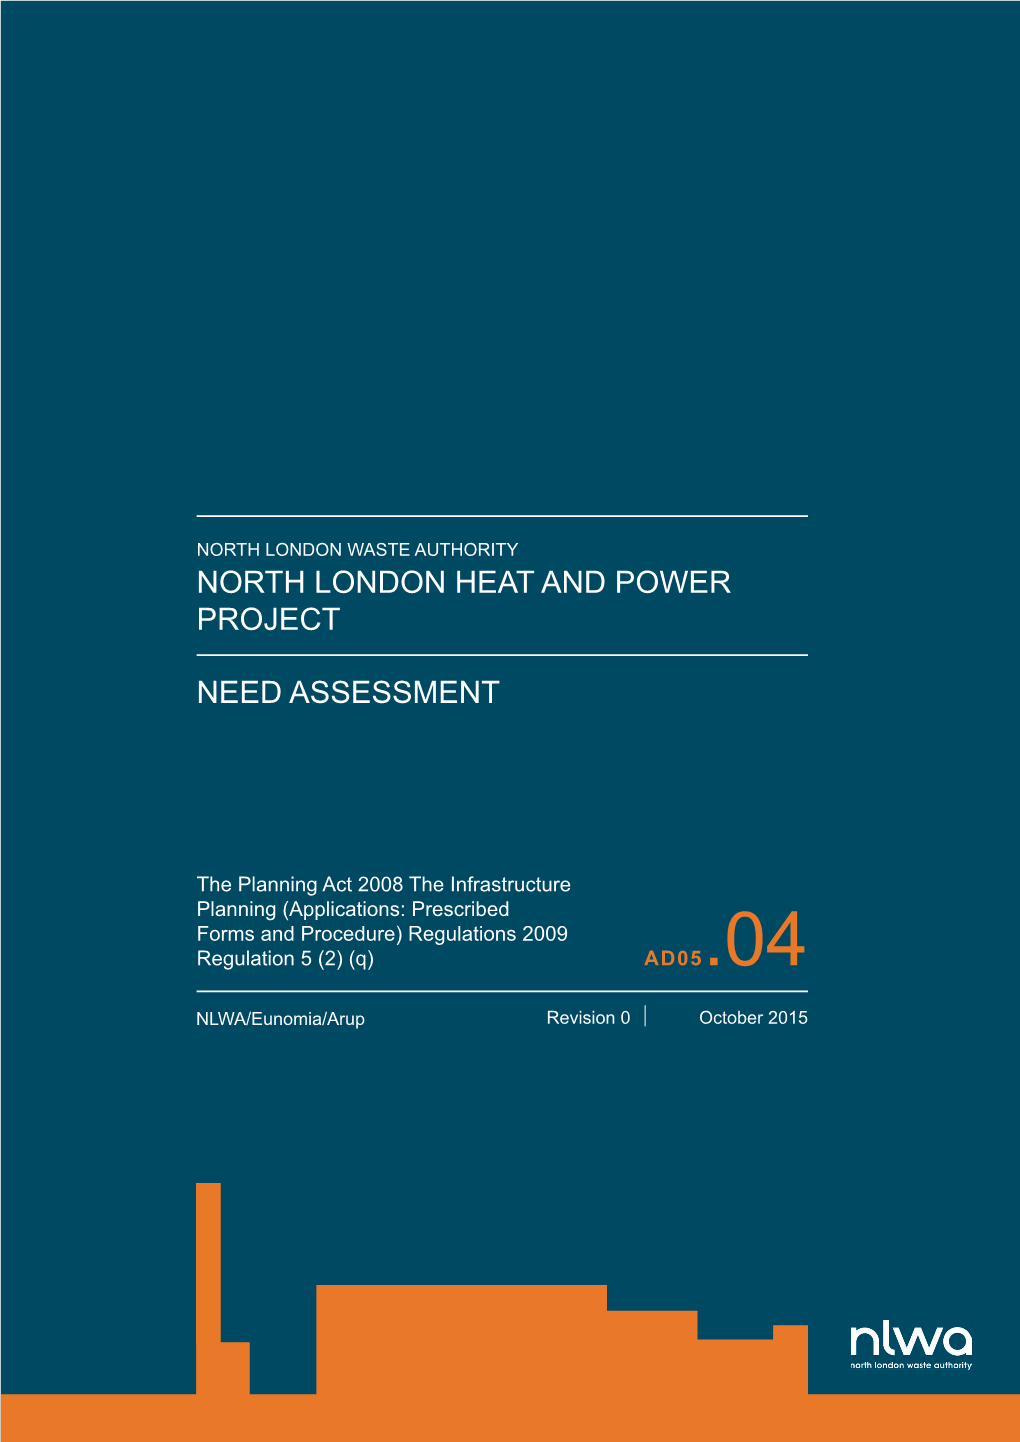 North London Heat and Power Project